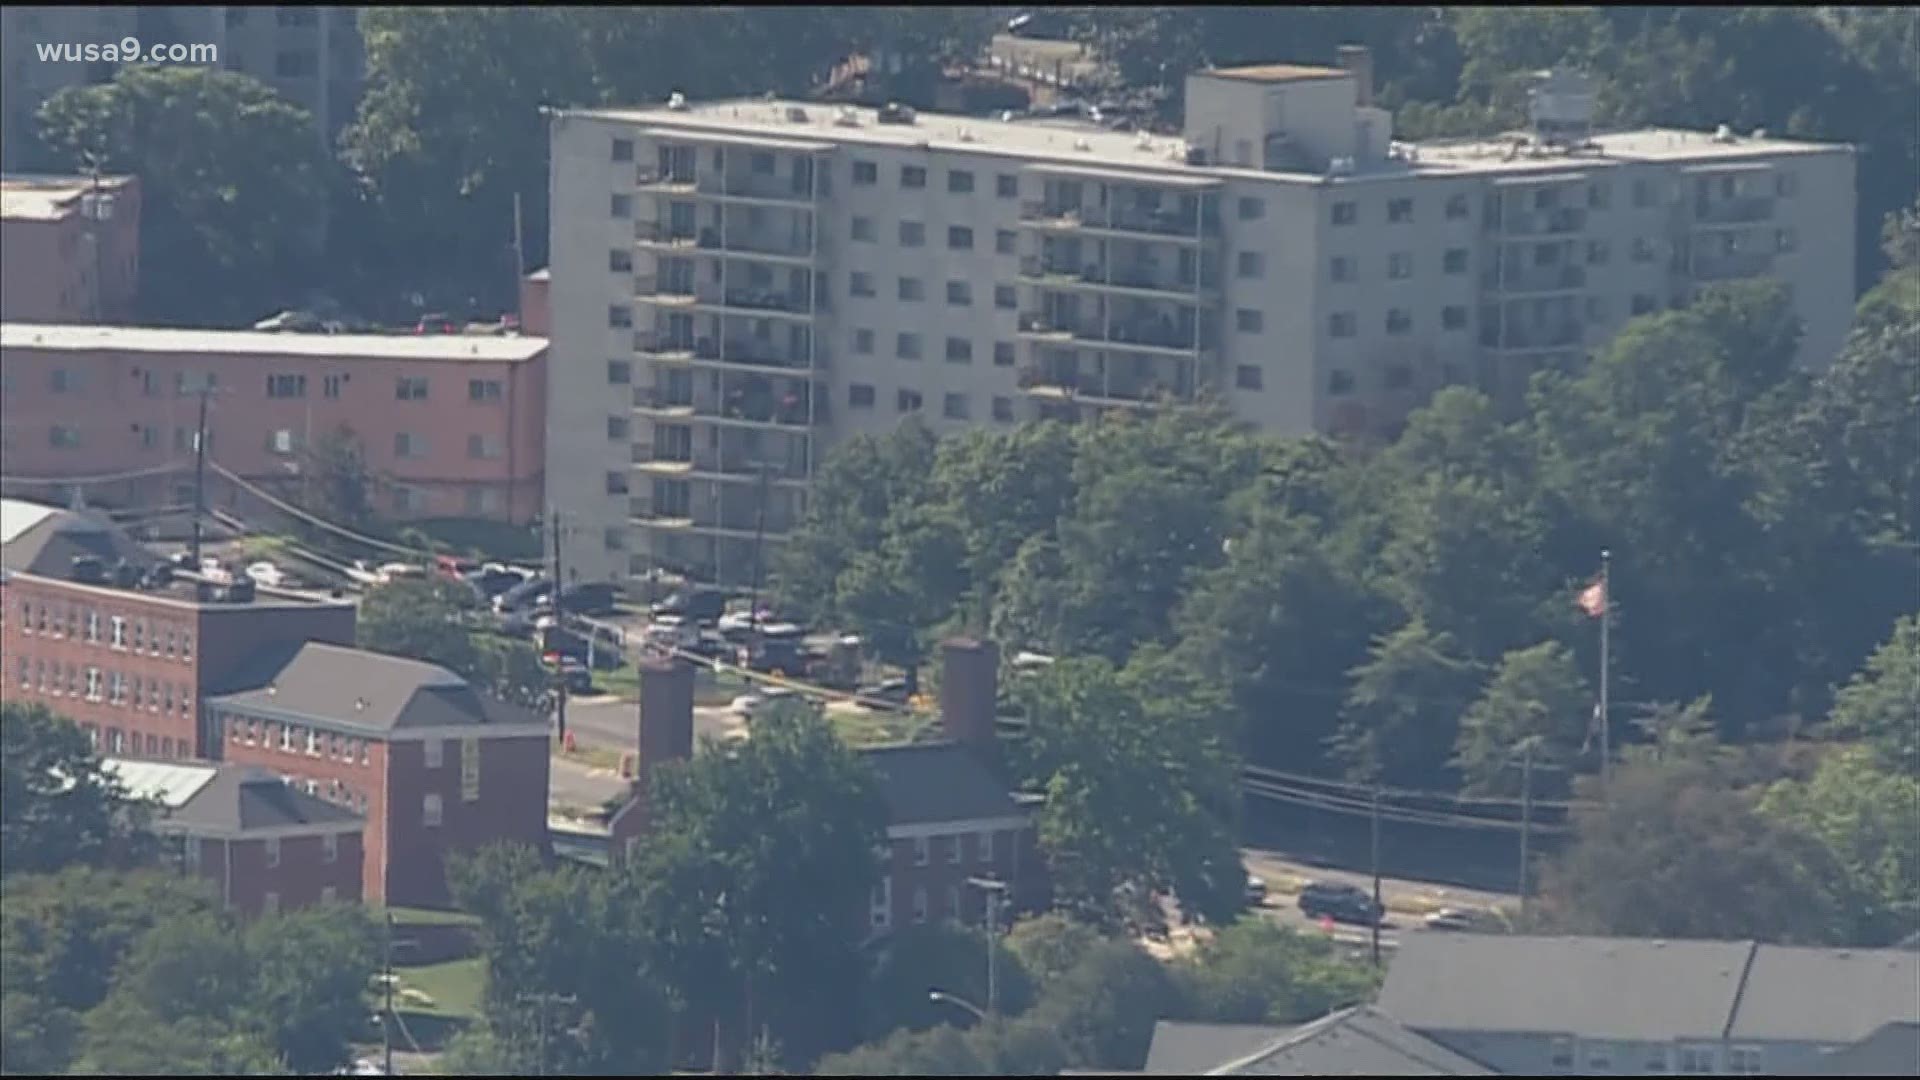 Prince George's County police tell WUSA9 that the shooting was not random.